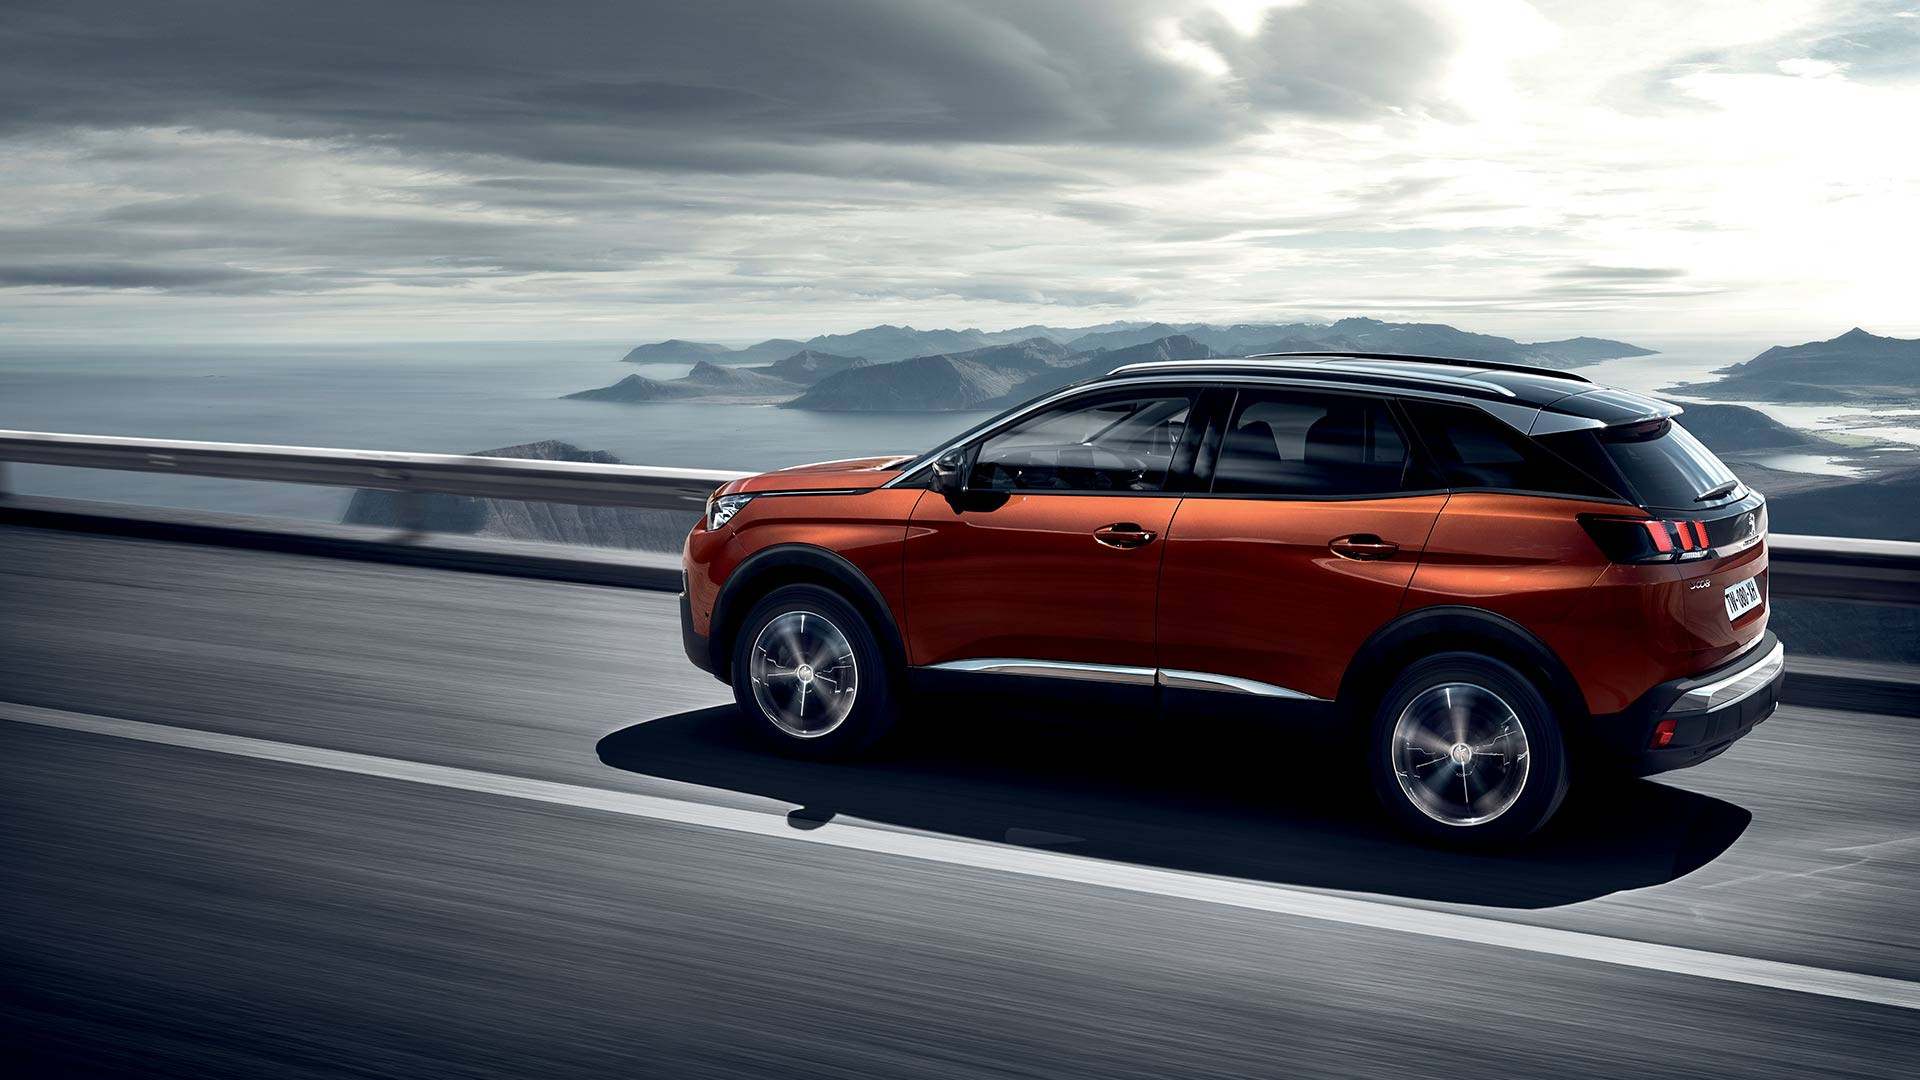 Amazing Peugeot 3008 Pictures & Backgrounds